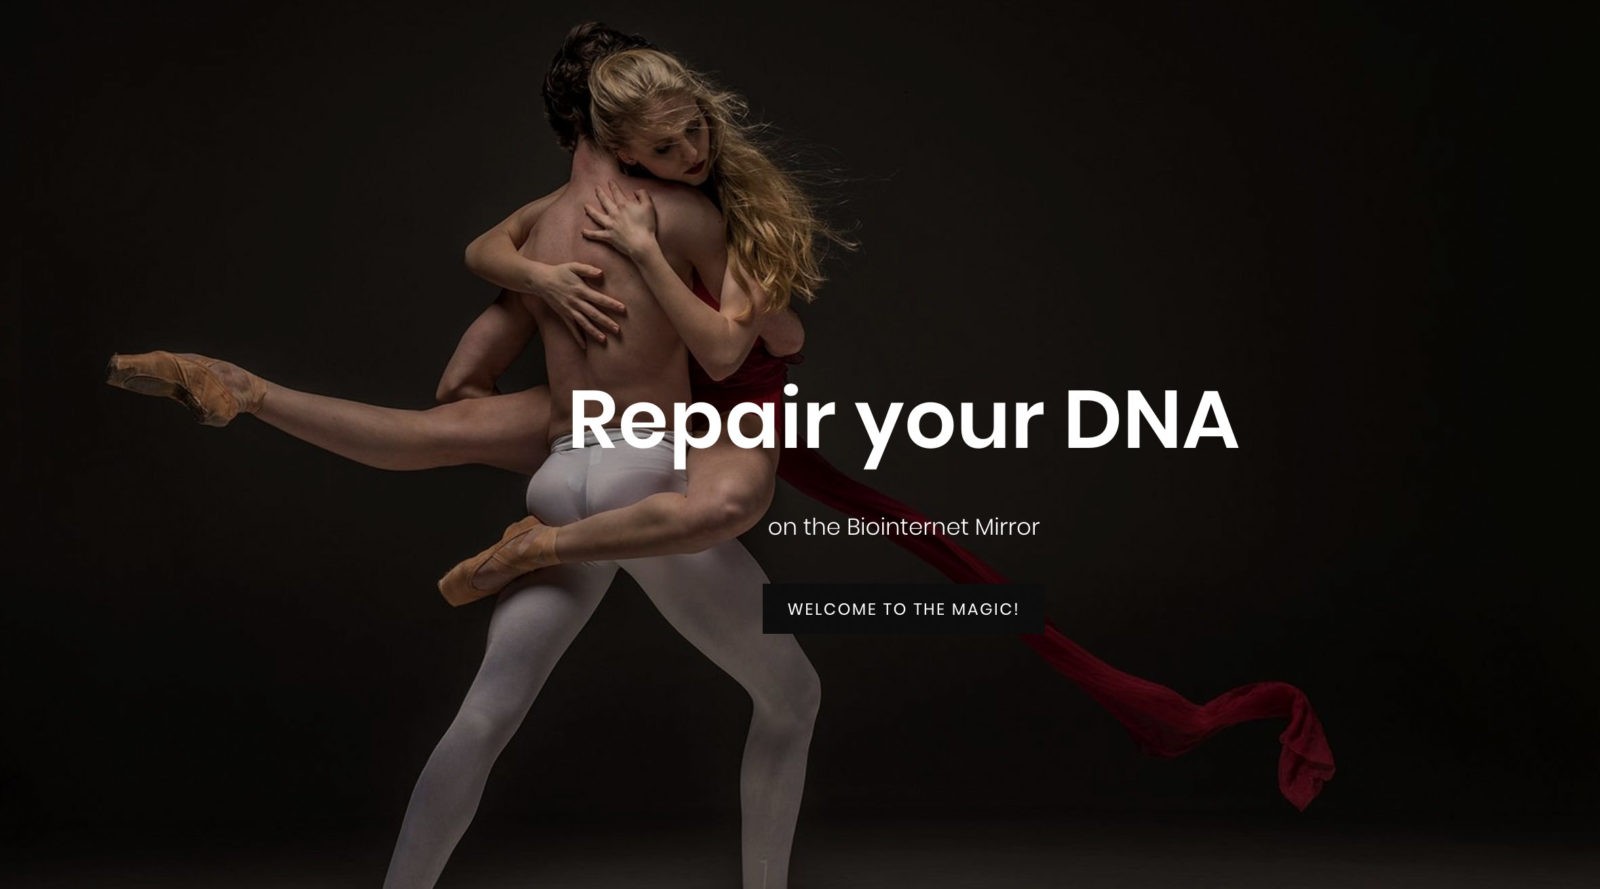 The Mirror - Repair your DNA